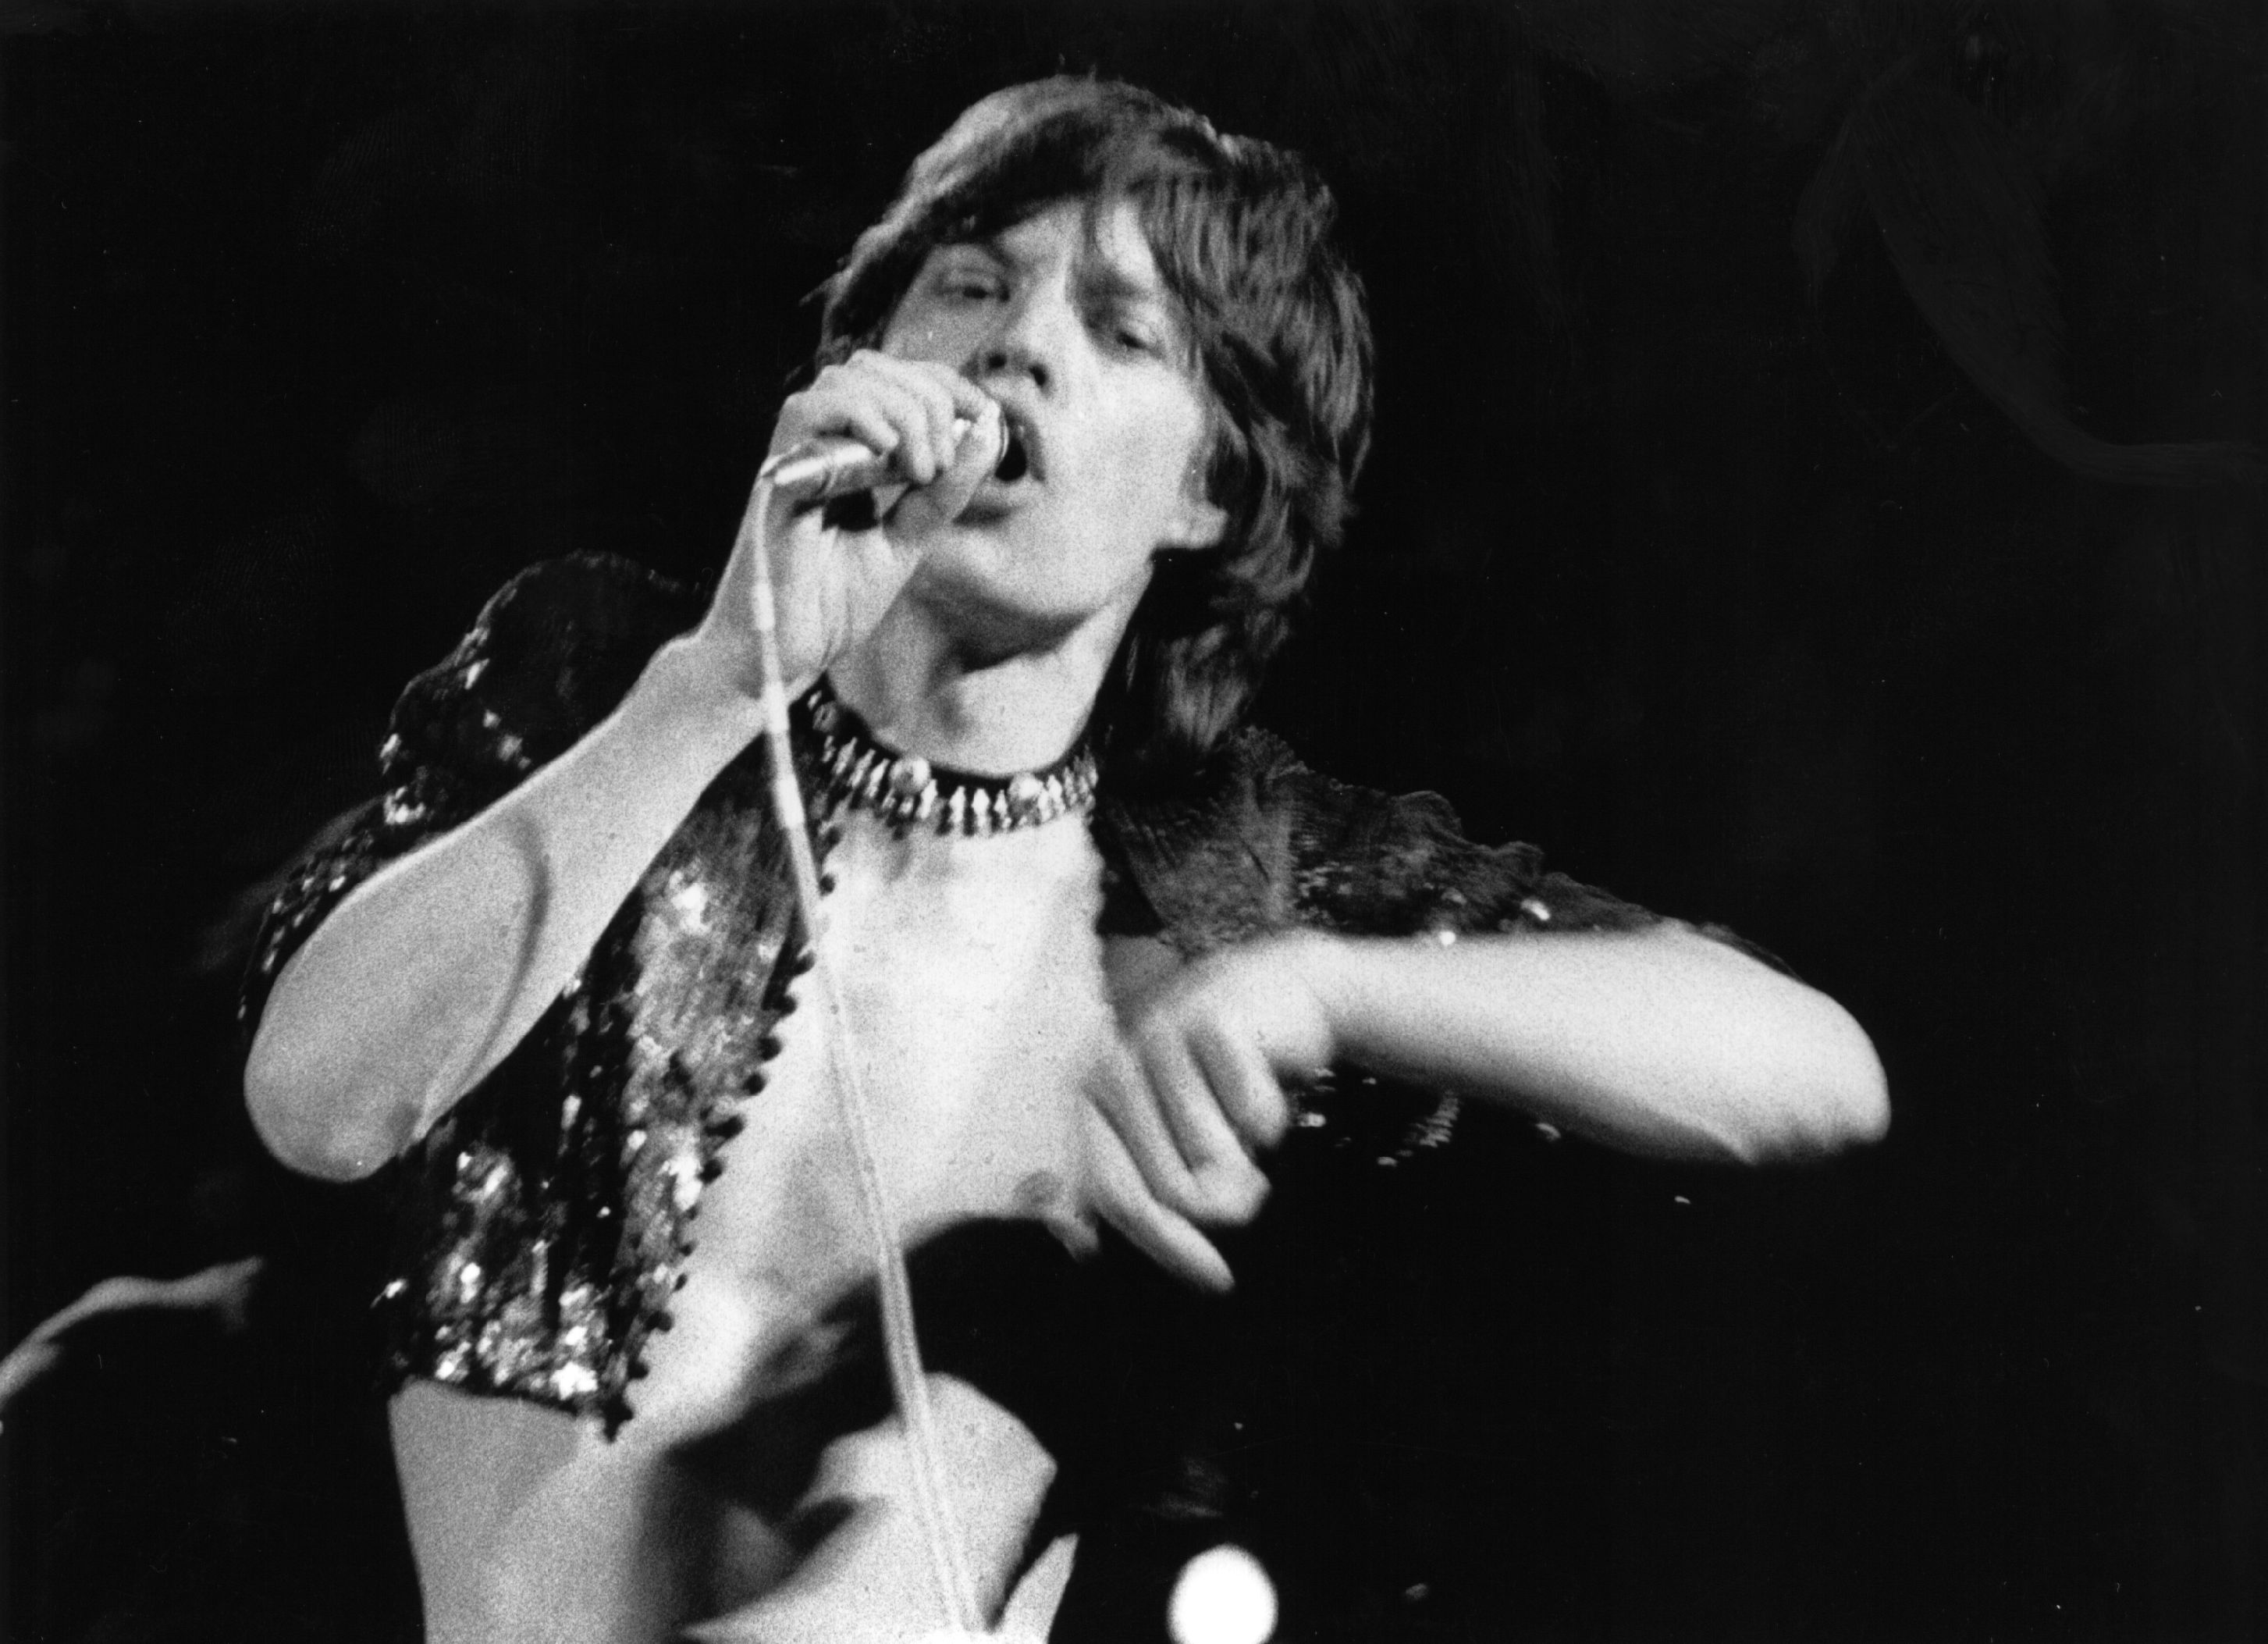 Mick Jagger with a microphone during The Rolling Stones' "Brown Sugar" era